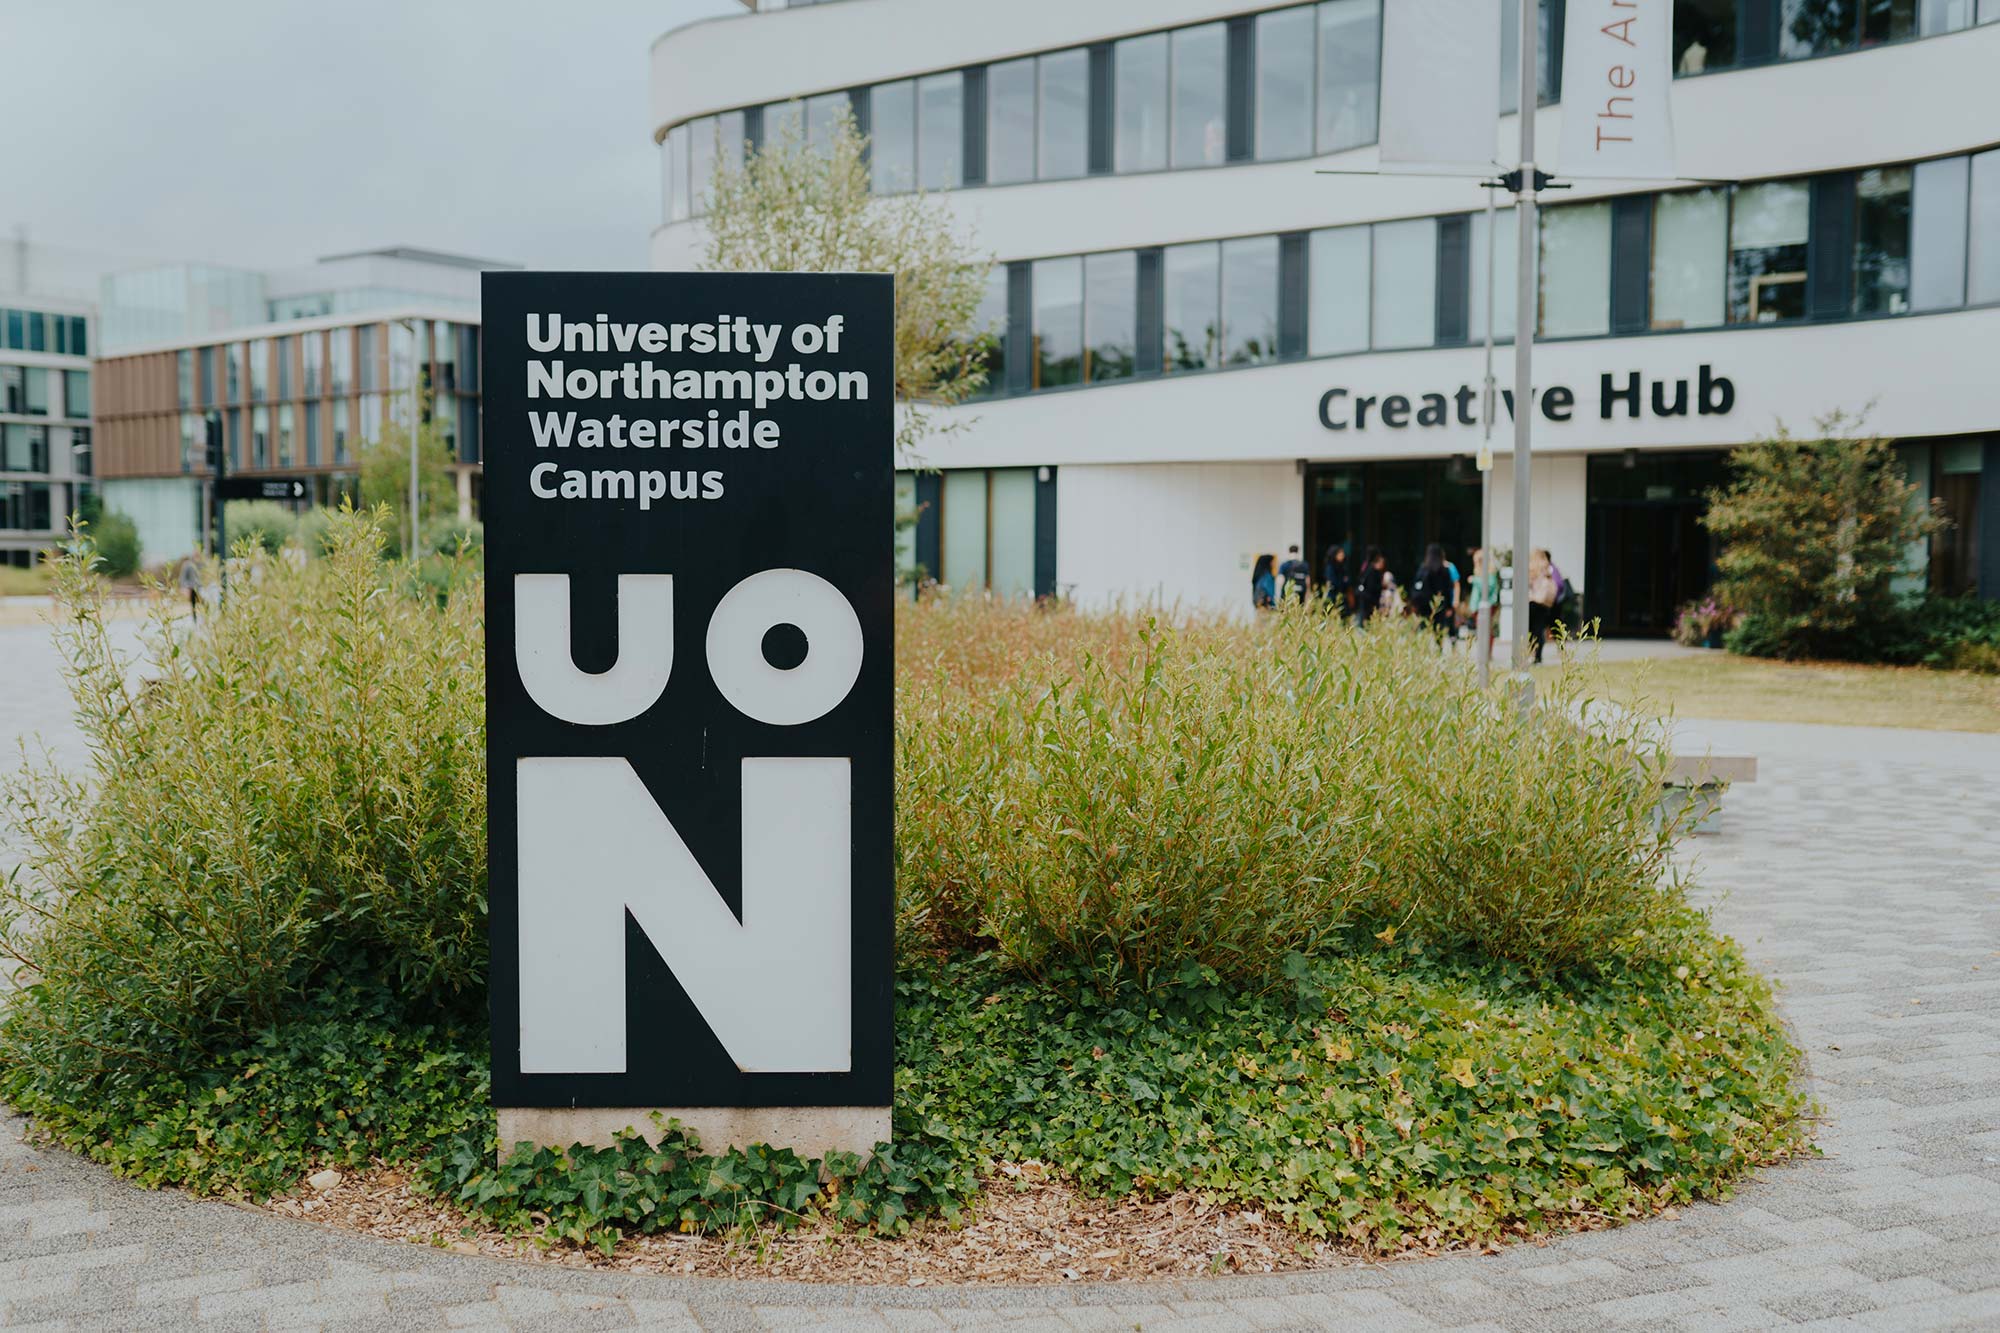 Big sign with 'University of Northampton: Waterside campus' written on it, over UON. The sign is in front of green foliage, which is in front of the Creative Hub building.